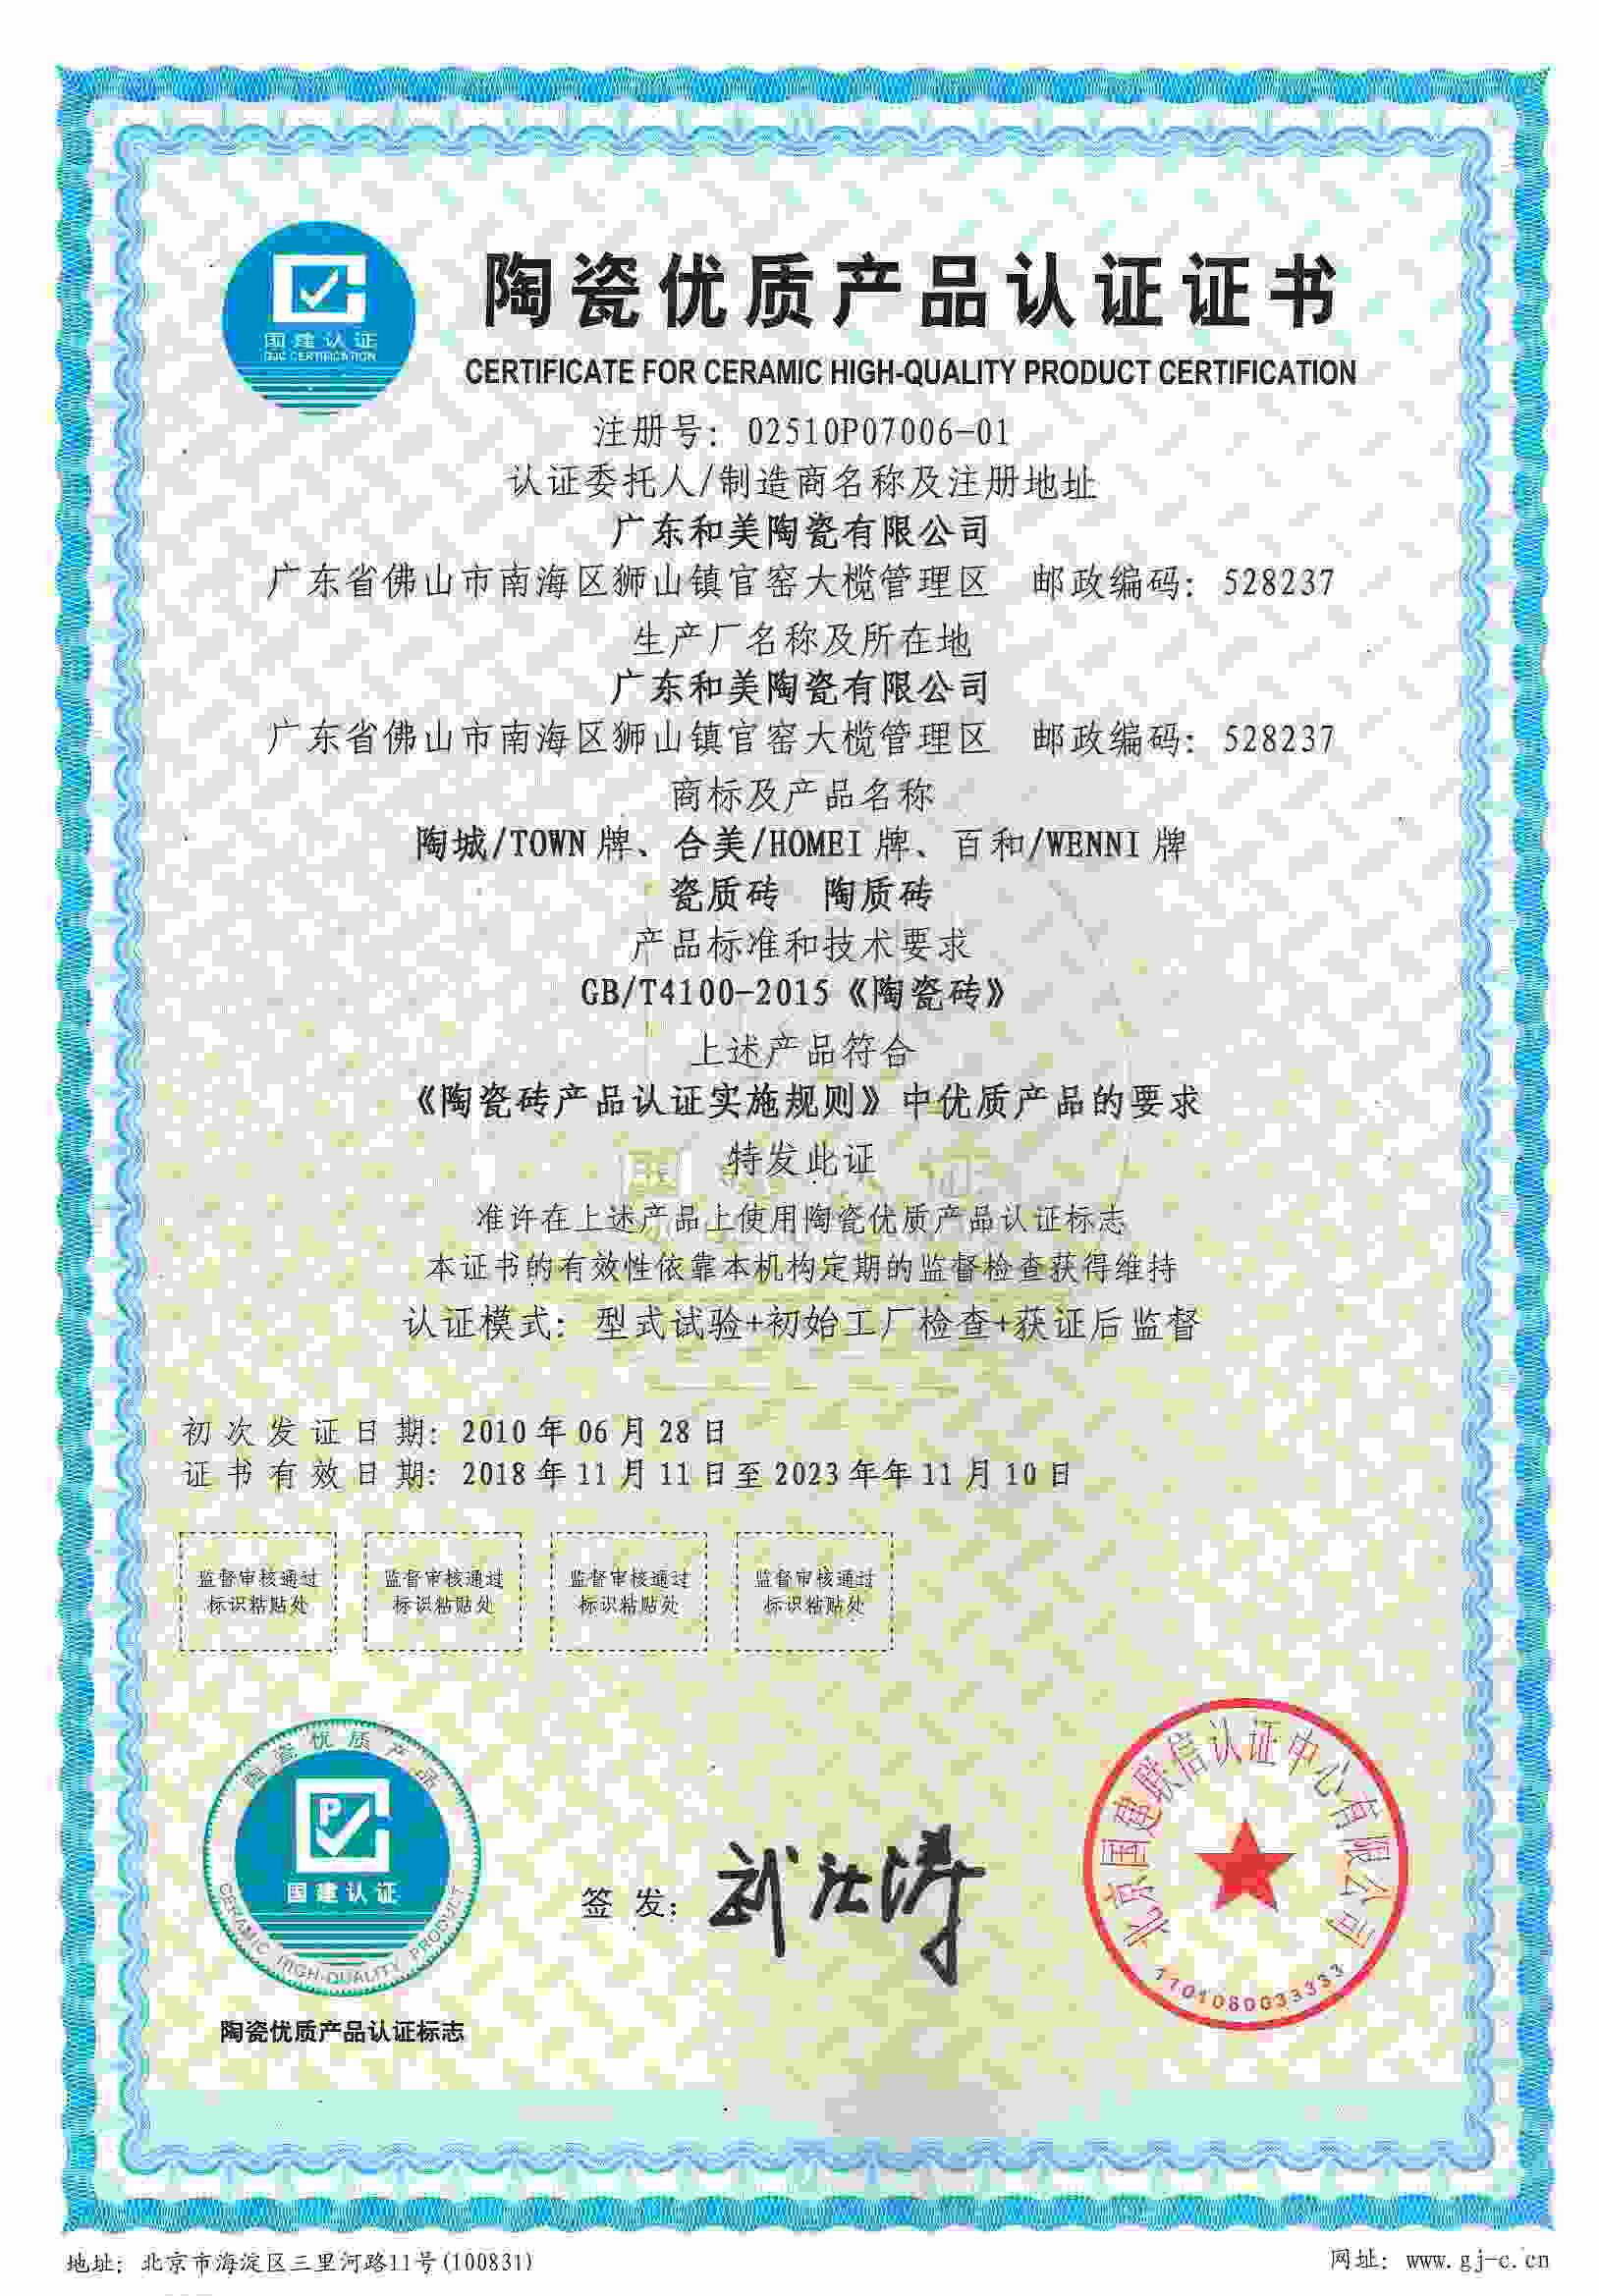 Ceramic quality product certification